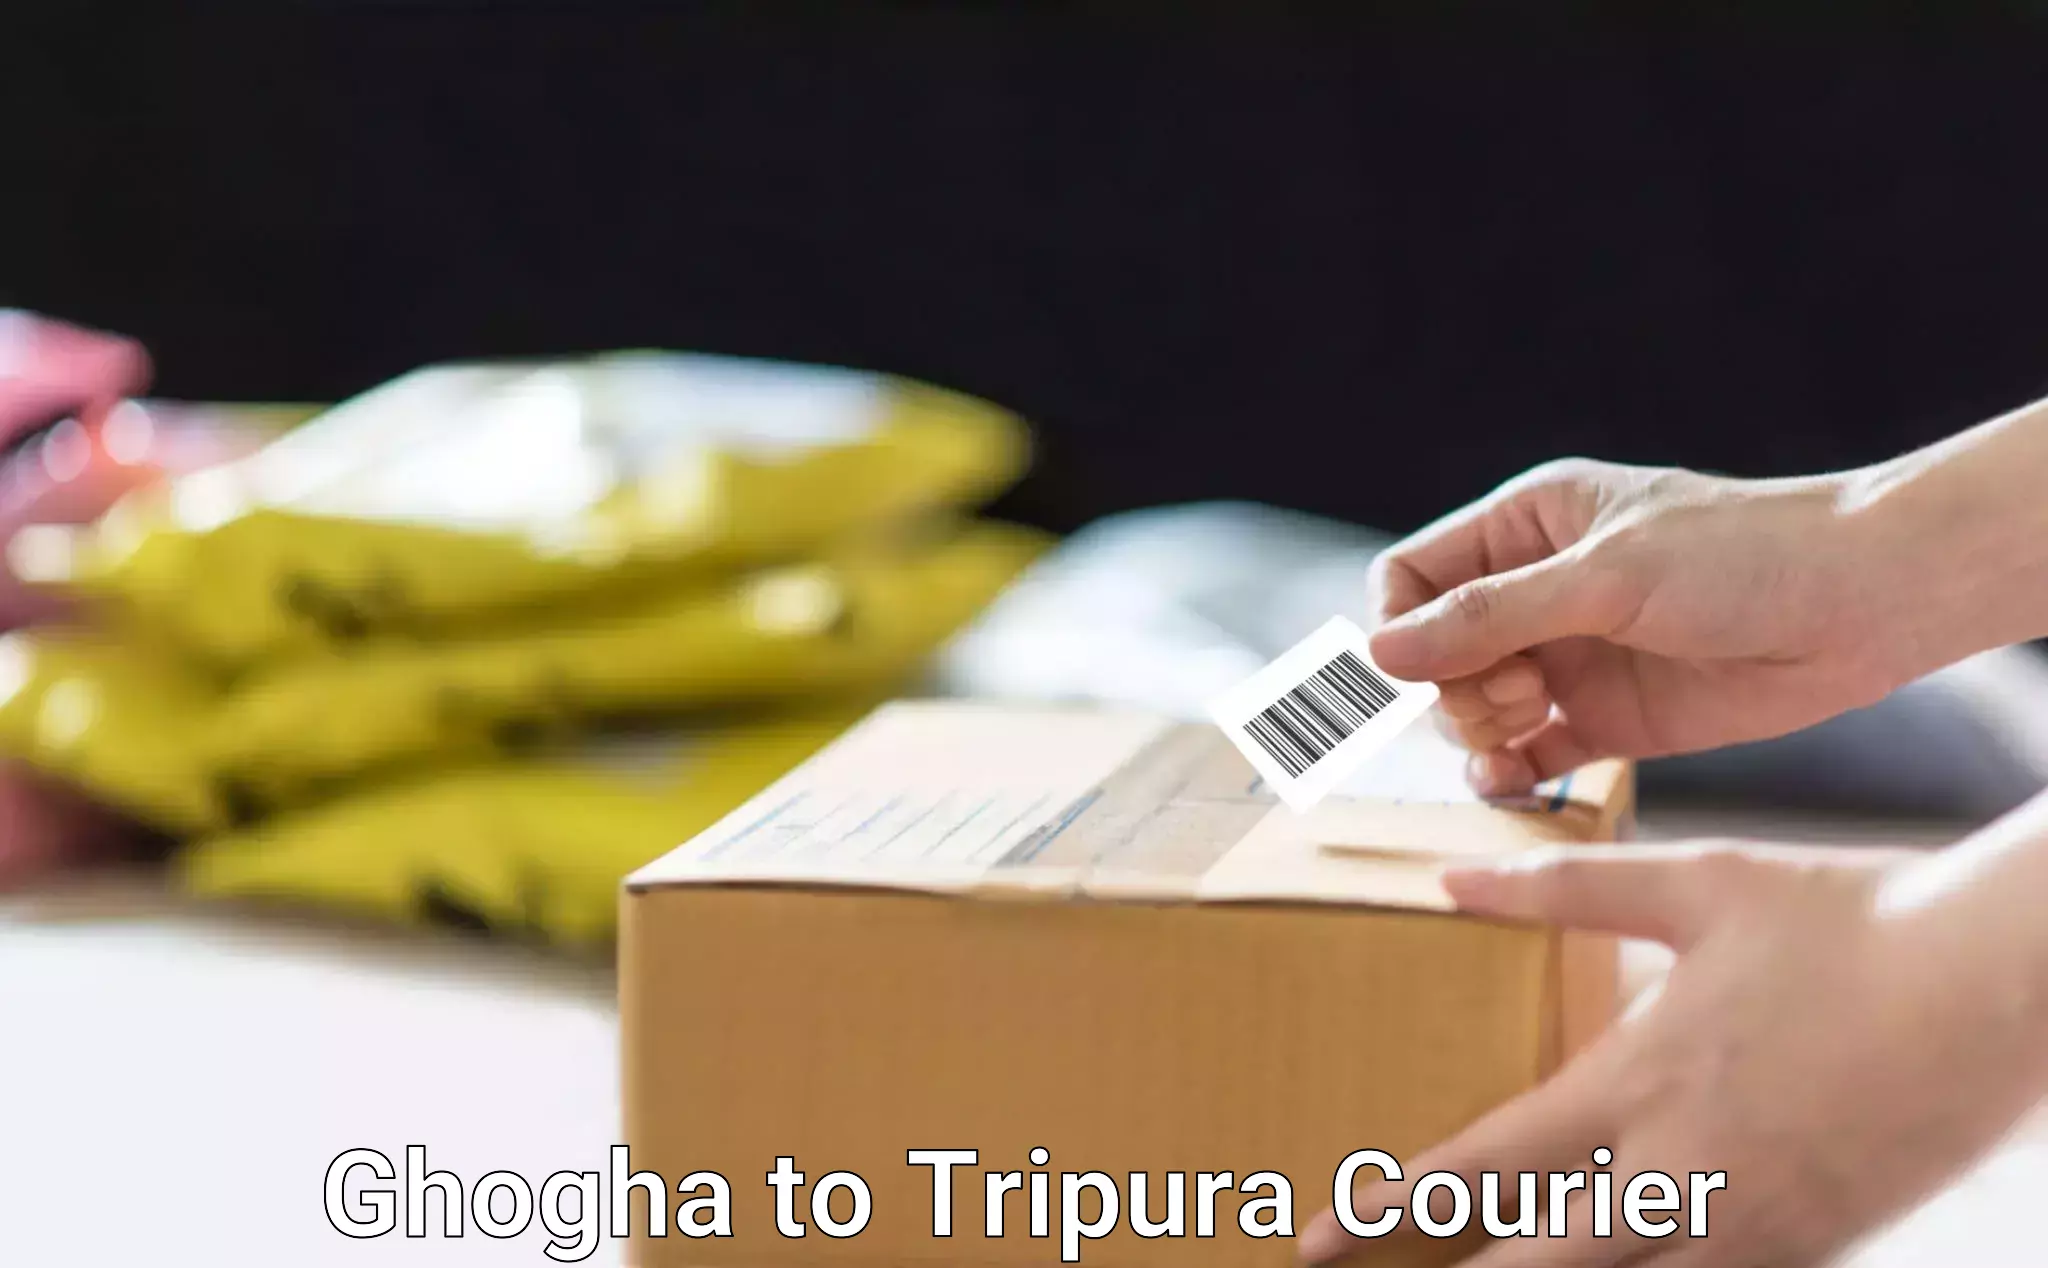 Comprehensive moving assistance in Ghogha to Udaipur Tripura